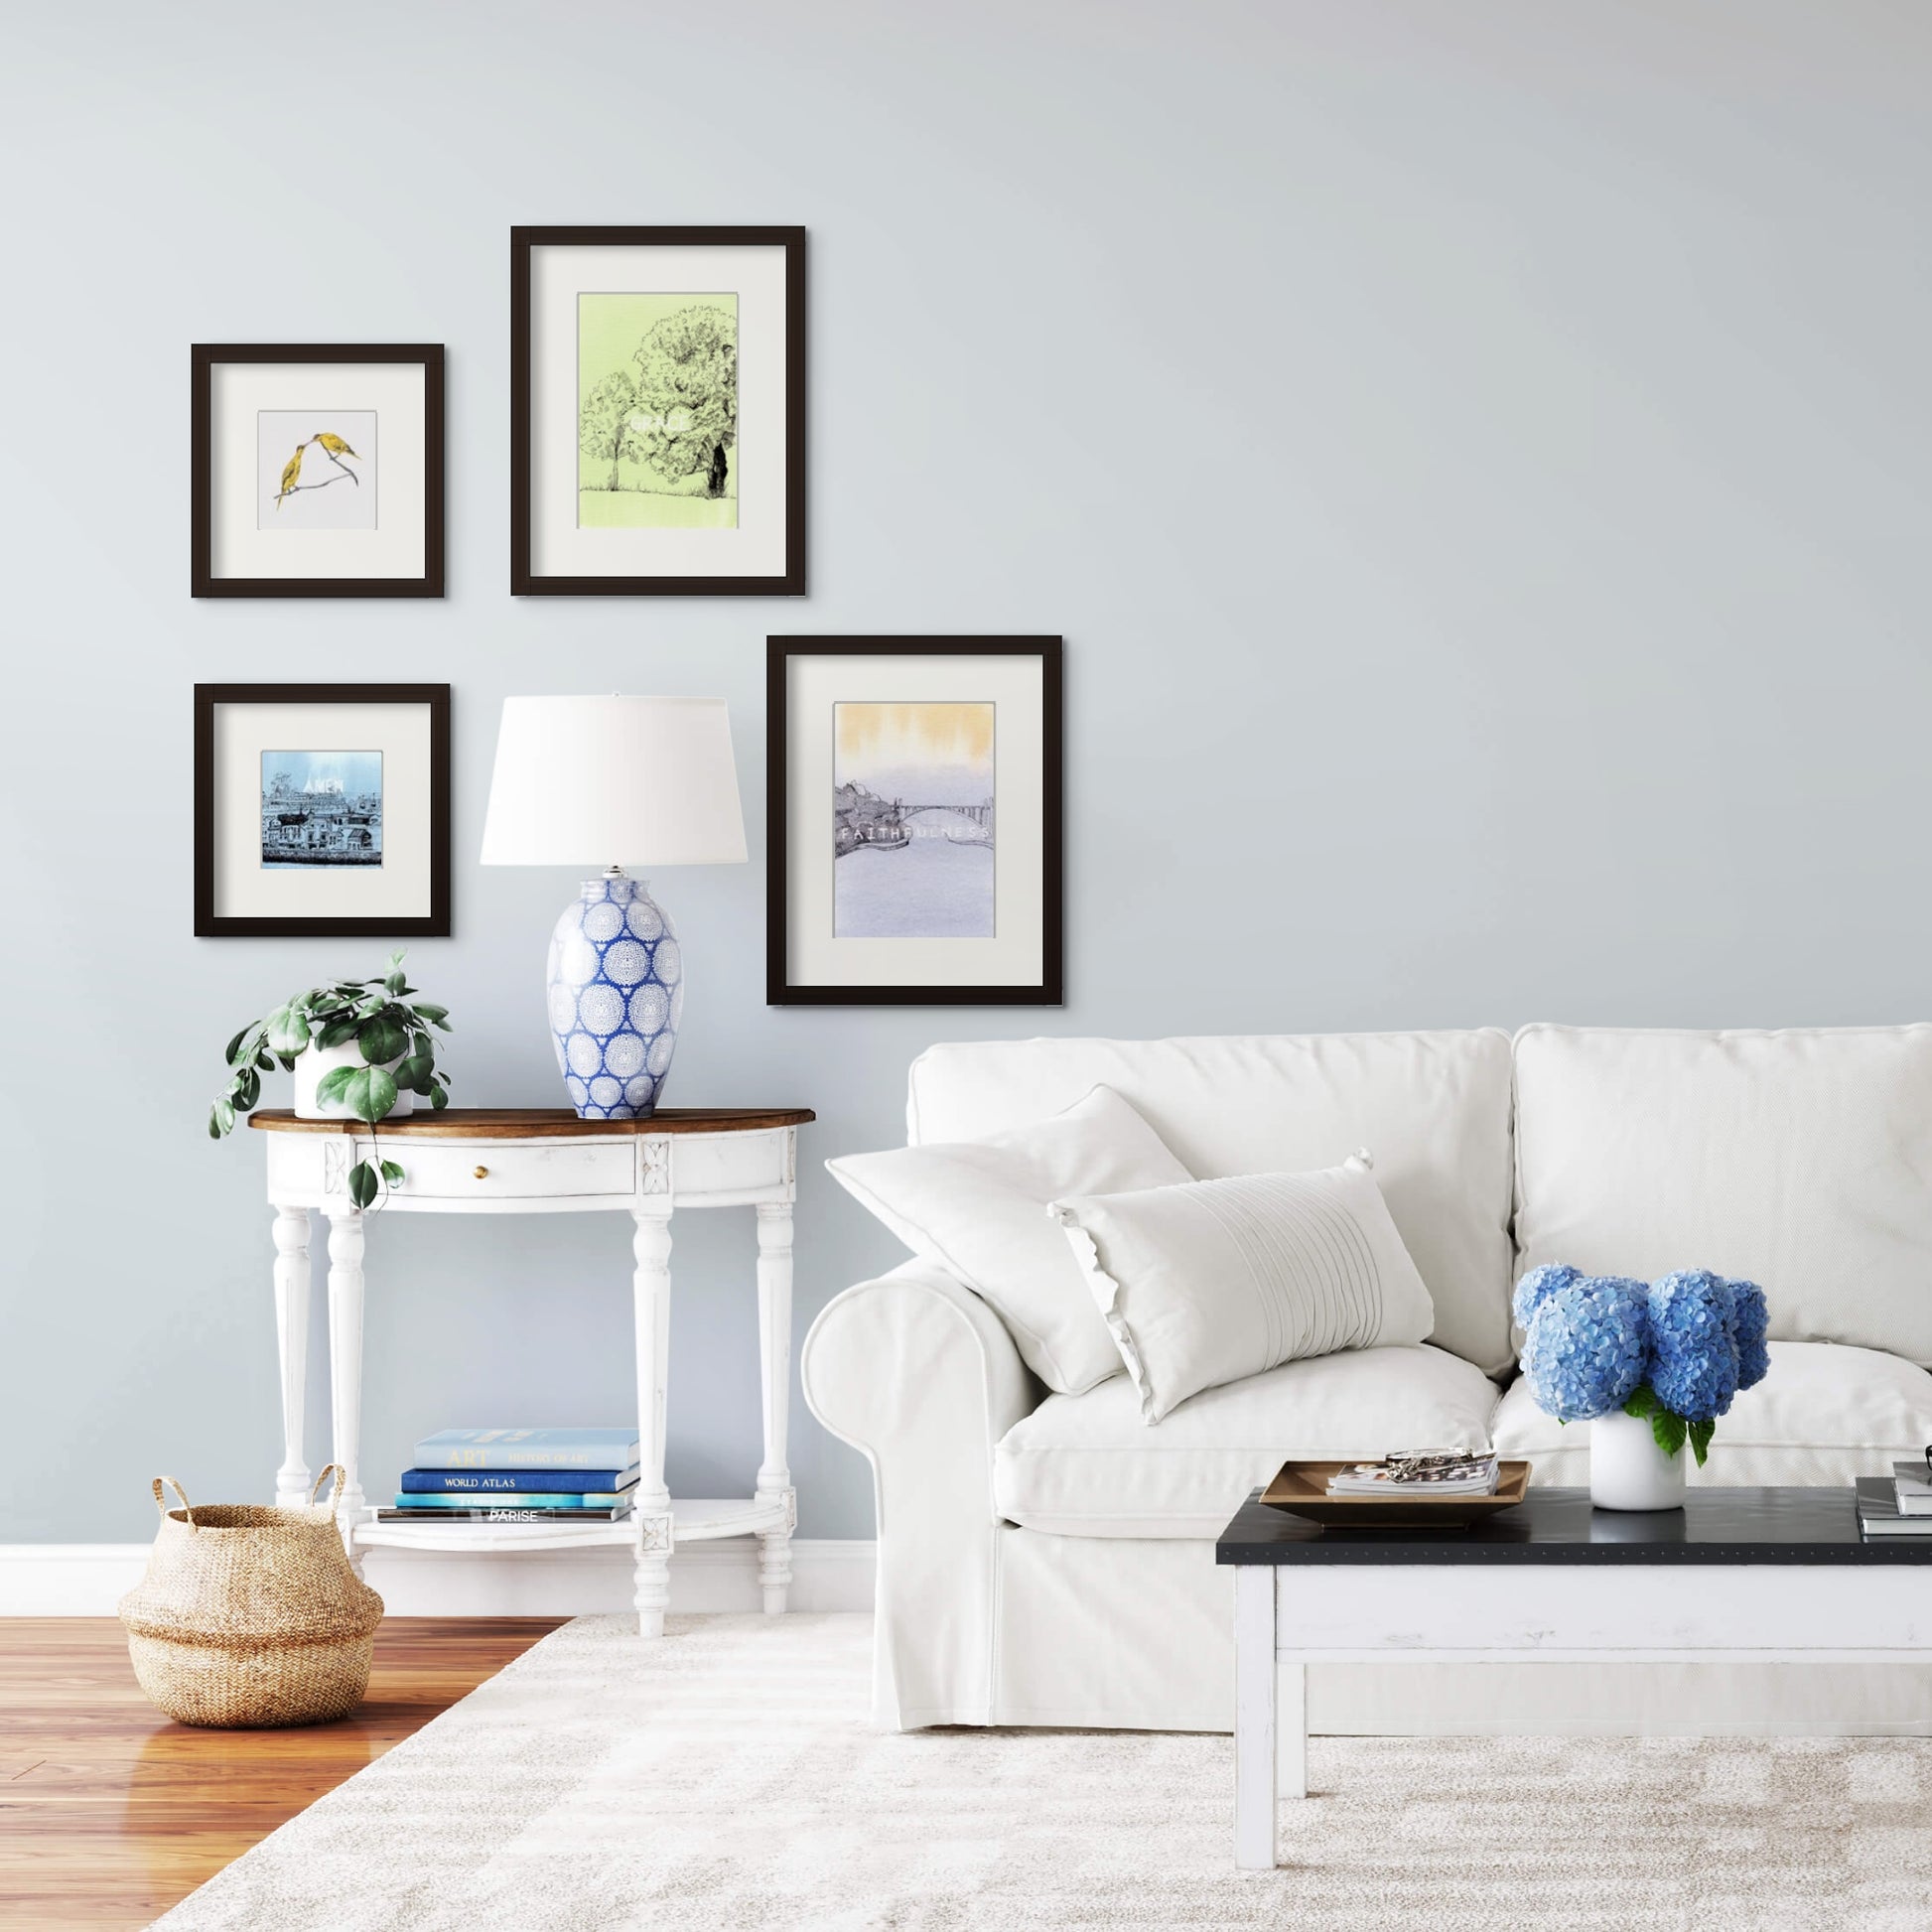 Image: bright, rustic, white colour living room with soft blue colour flowers. A series of line drawing framed artwork above the sofa.